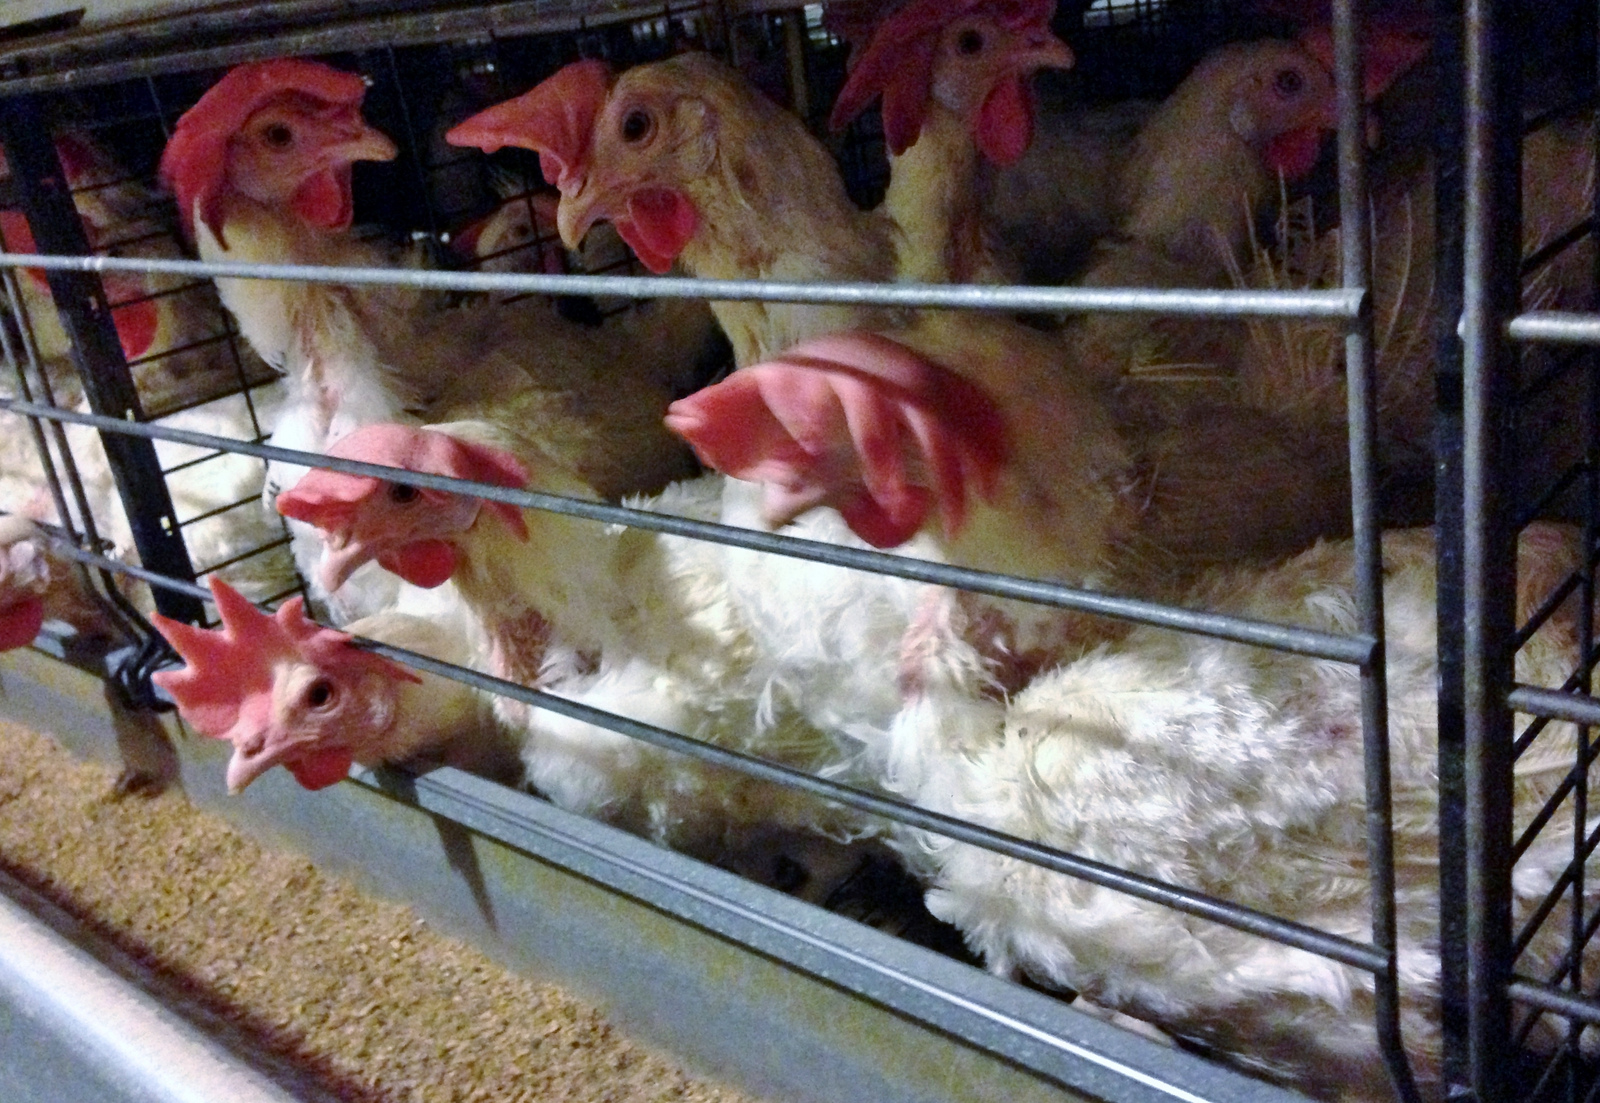 6 Major Undercover Investigations that Prove We Need to Oppose Ag-Gag Bills